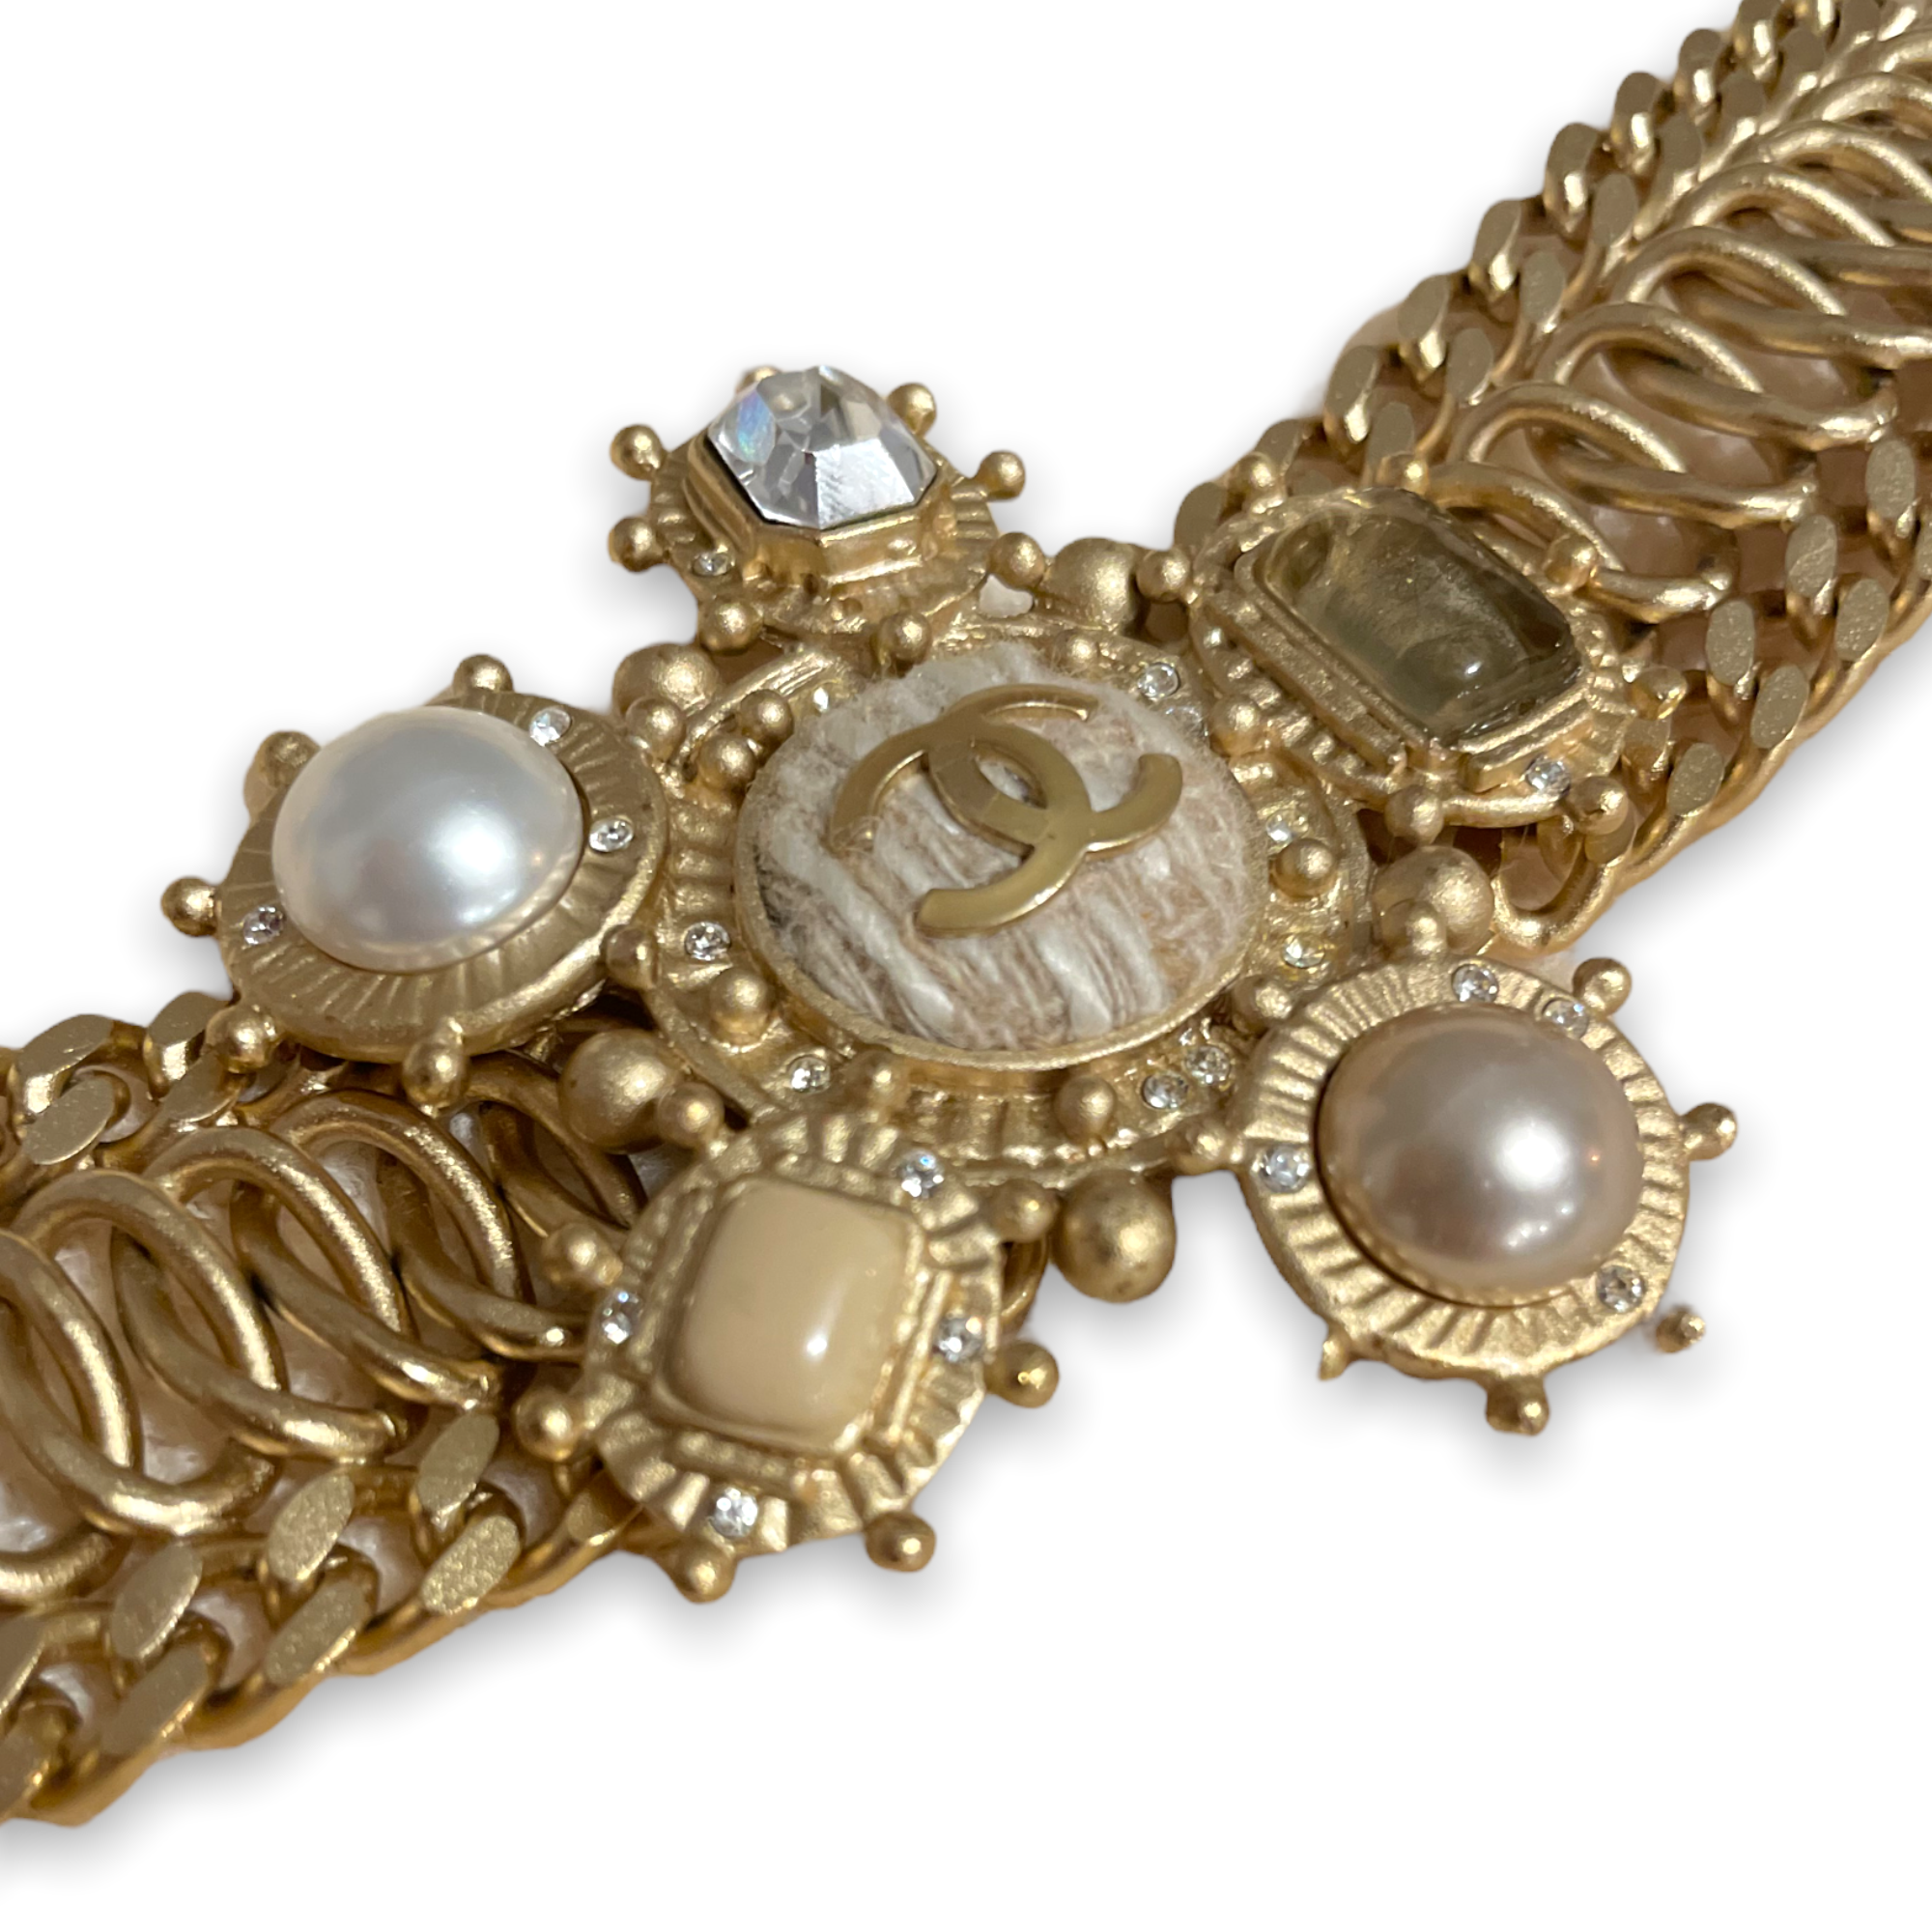 CHANEL Vintage Flattened Gold-Tone Metal Chain Belt with Stone Set Buckle